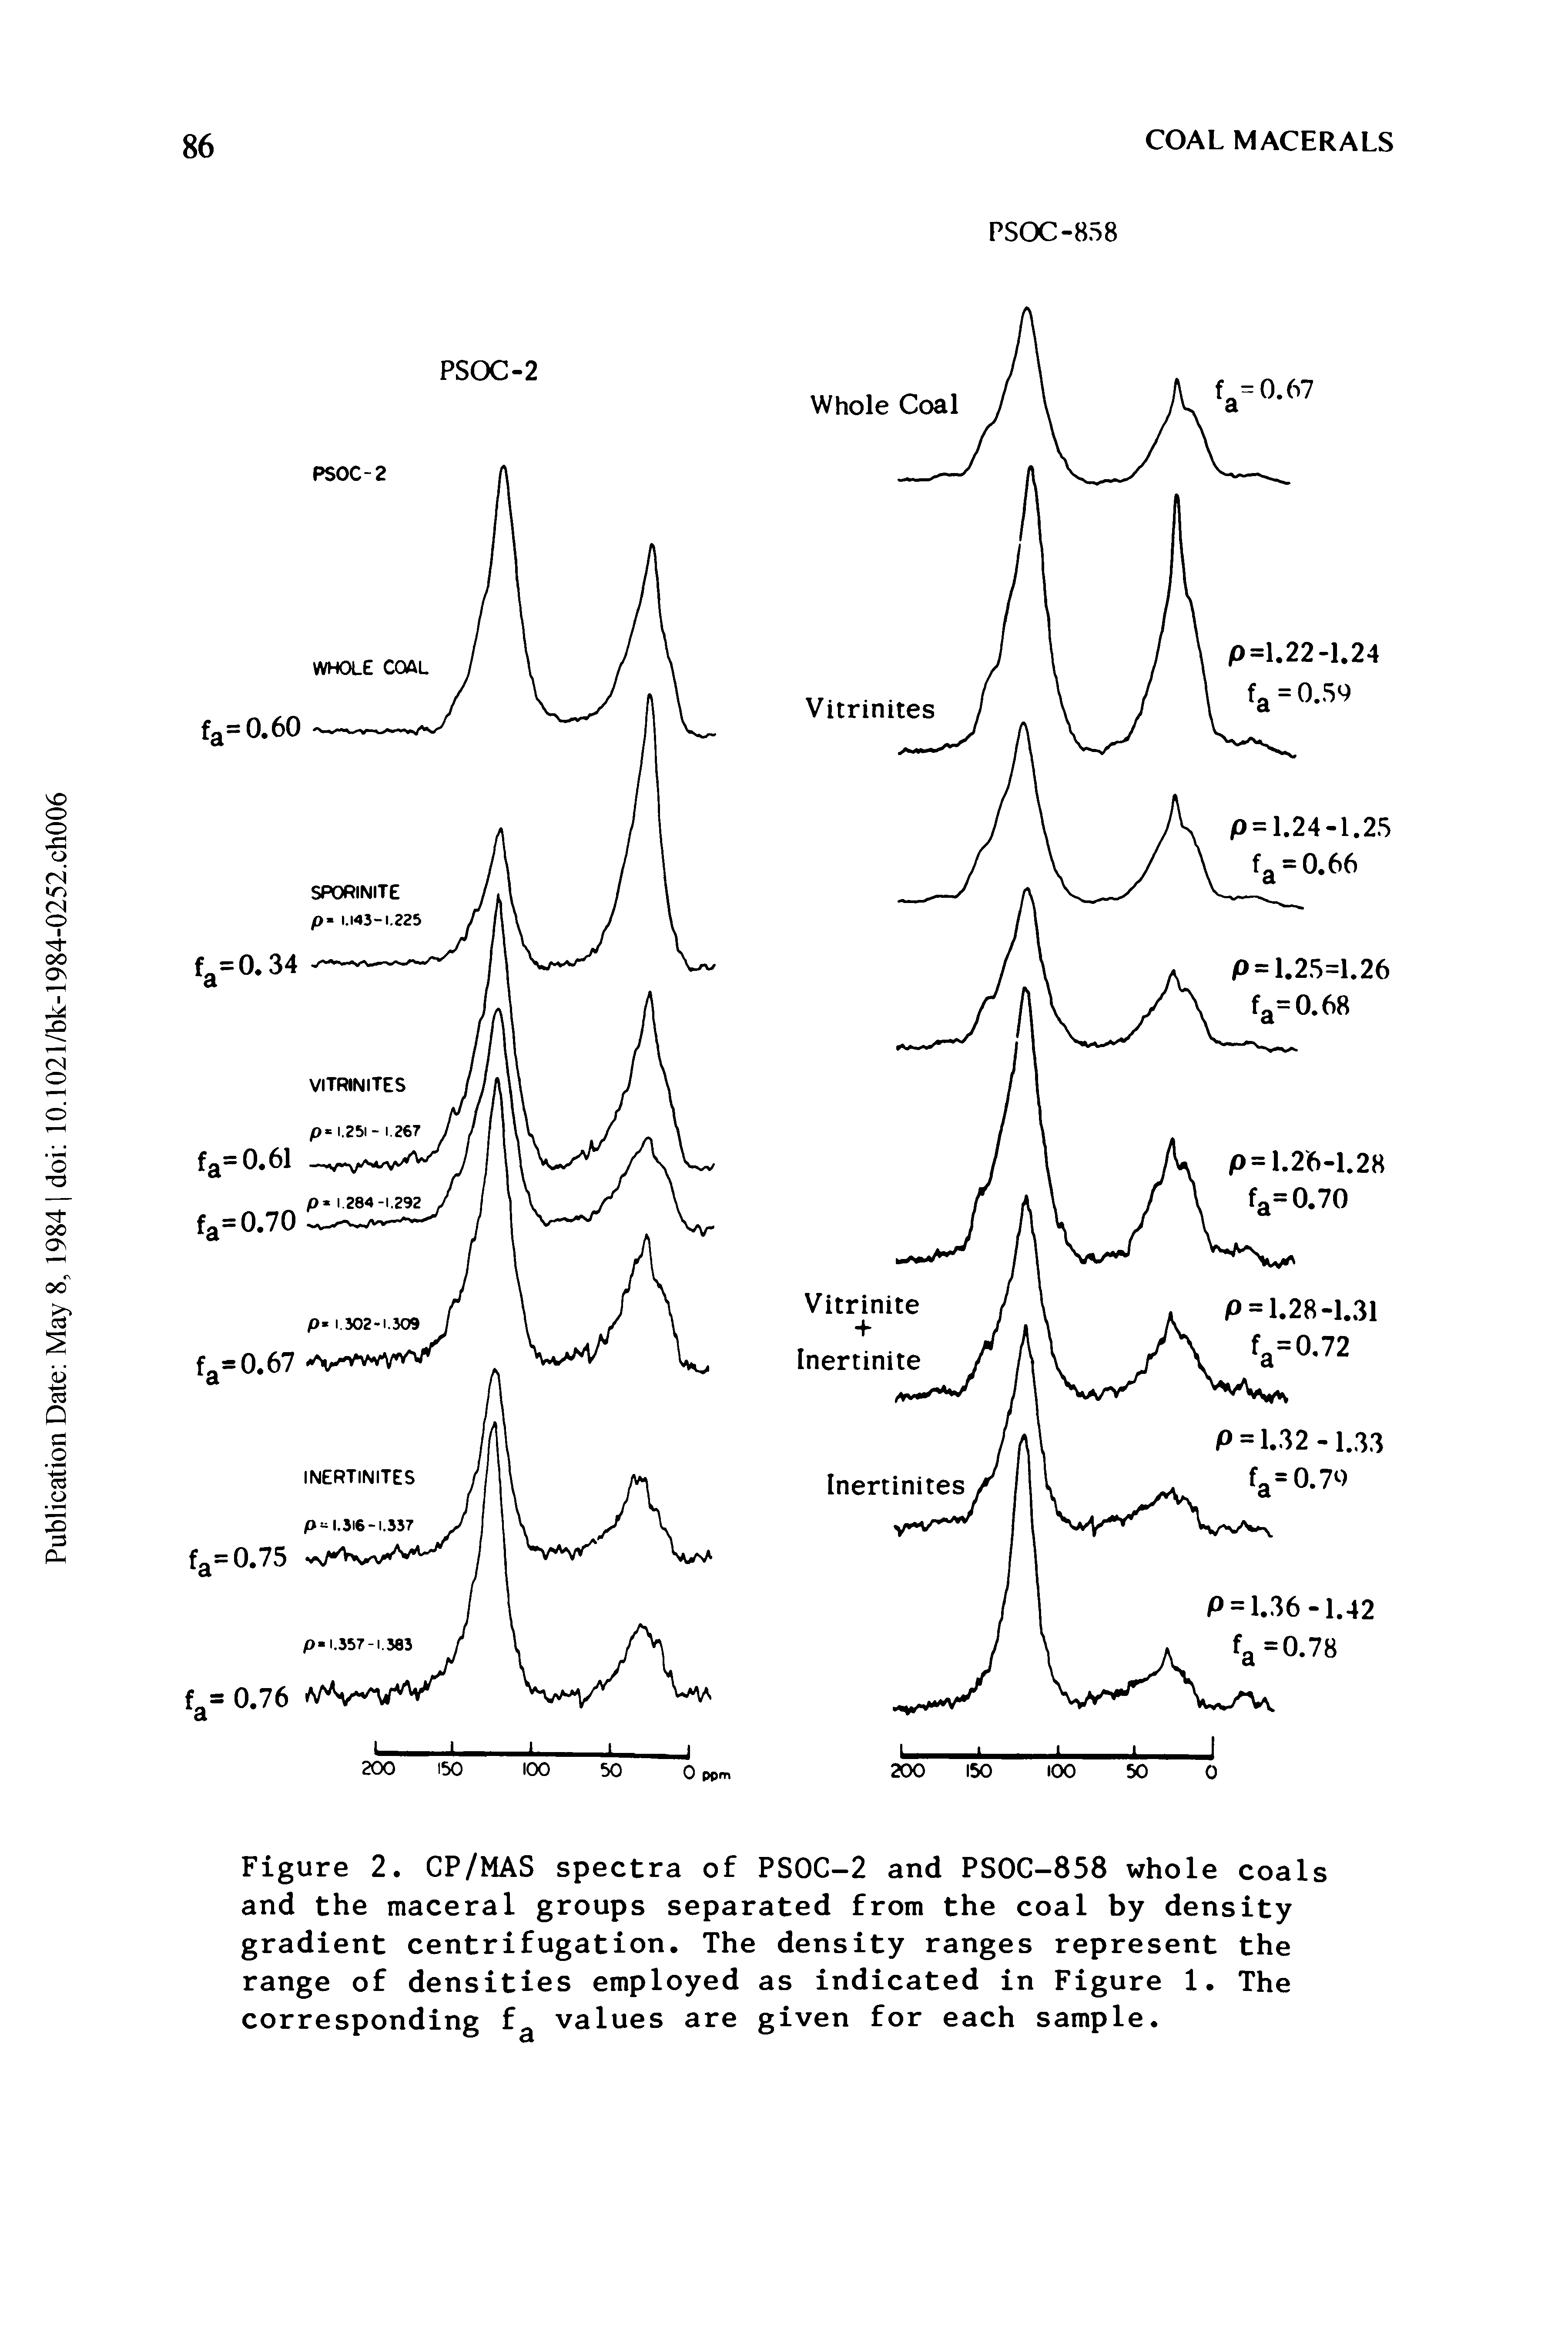 Figure 2. CP/MAS spectra of PSOC-2 and PSOC-858 whole coals and the maceral groups separated from the coal by density gradient centrifugation. The density ranges represent the range of densities employed as indicated in Figure 1. The corresponding fa values are given for each sample.